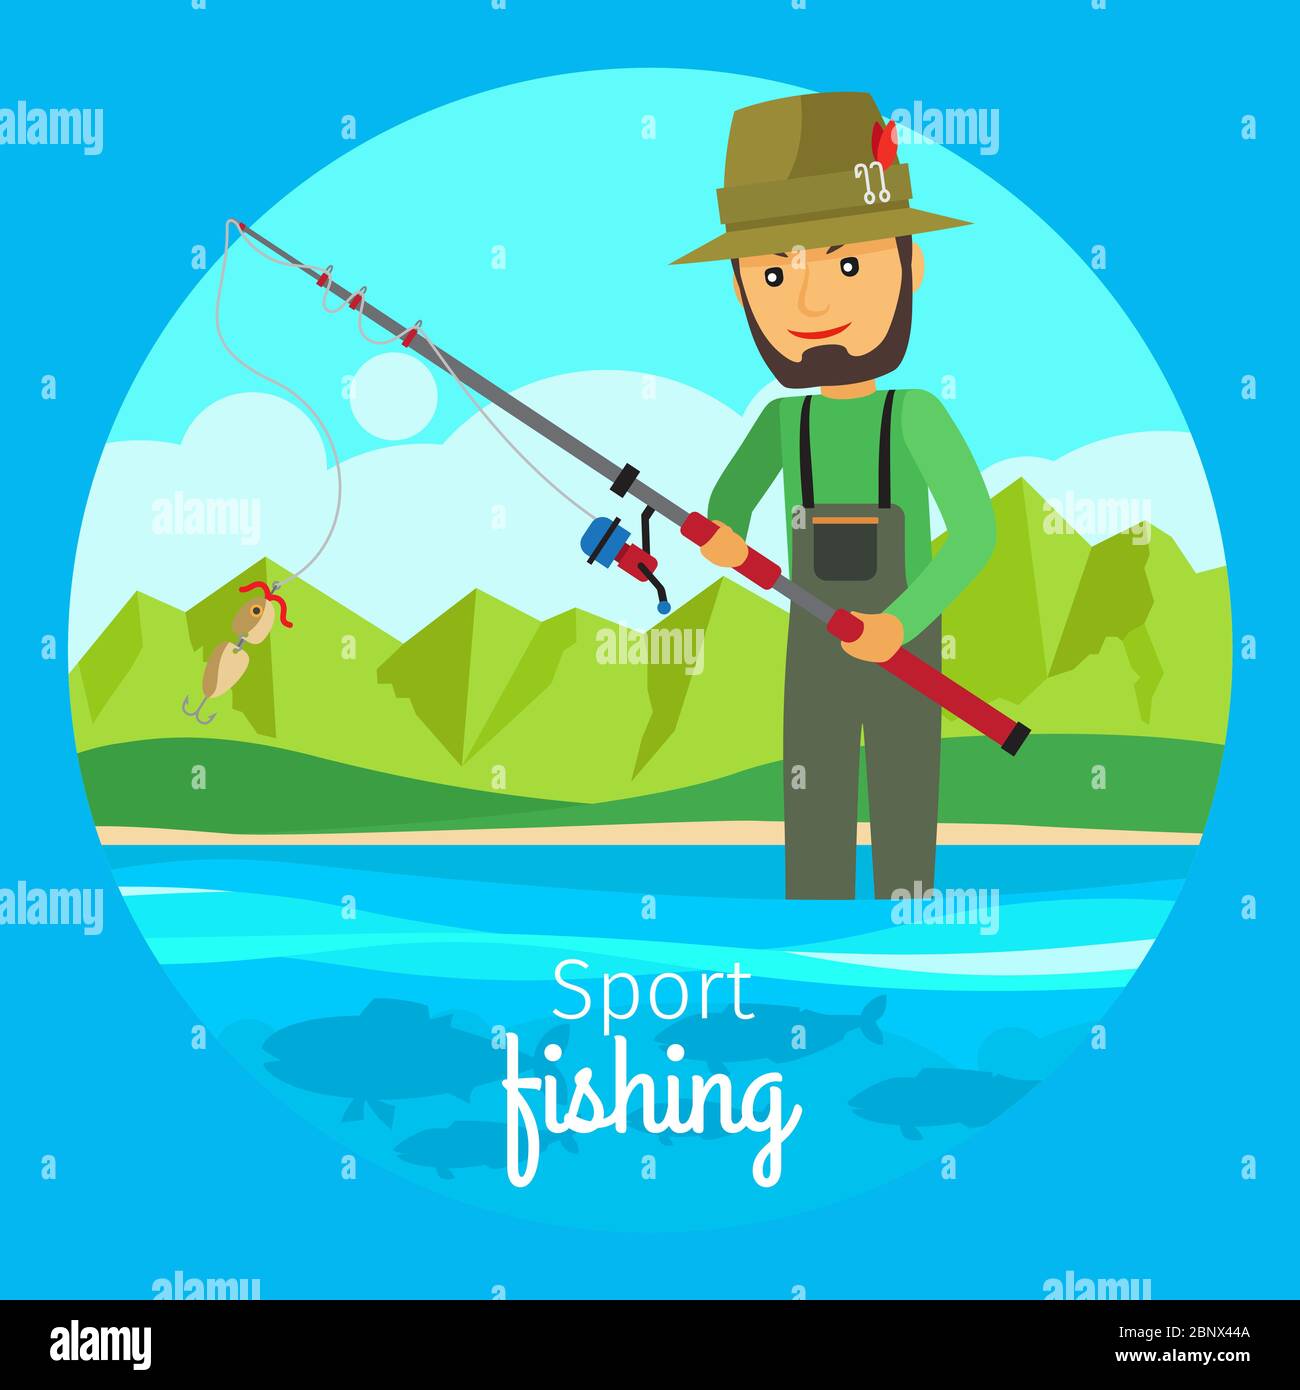 Sport fishing vector concept. Fisherman in boat with fishing gear